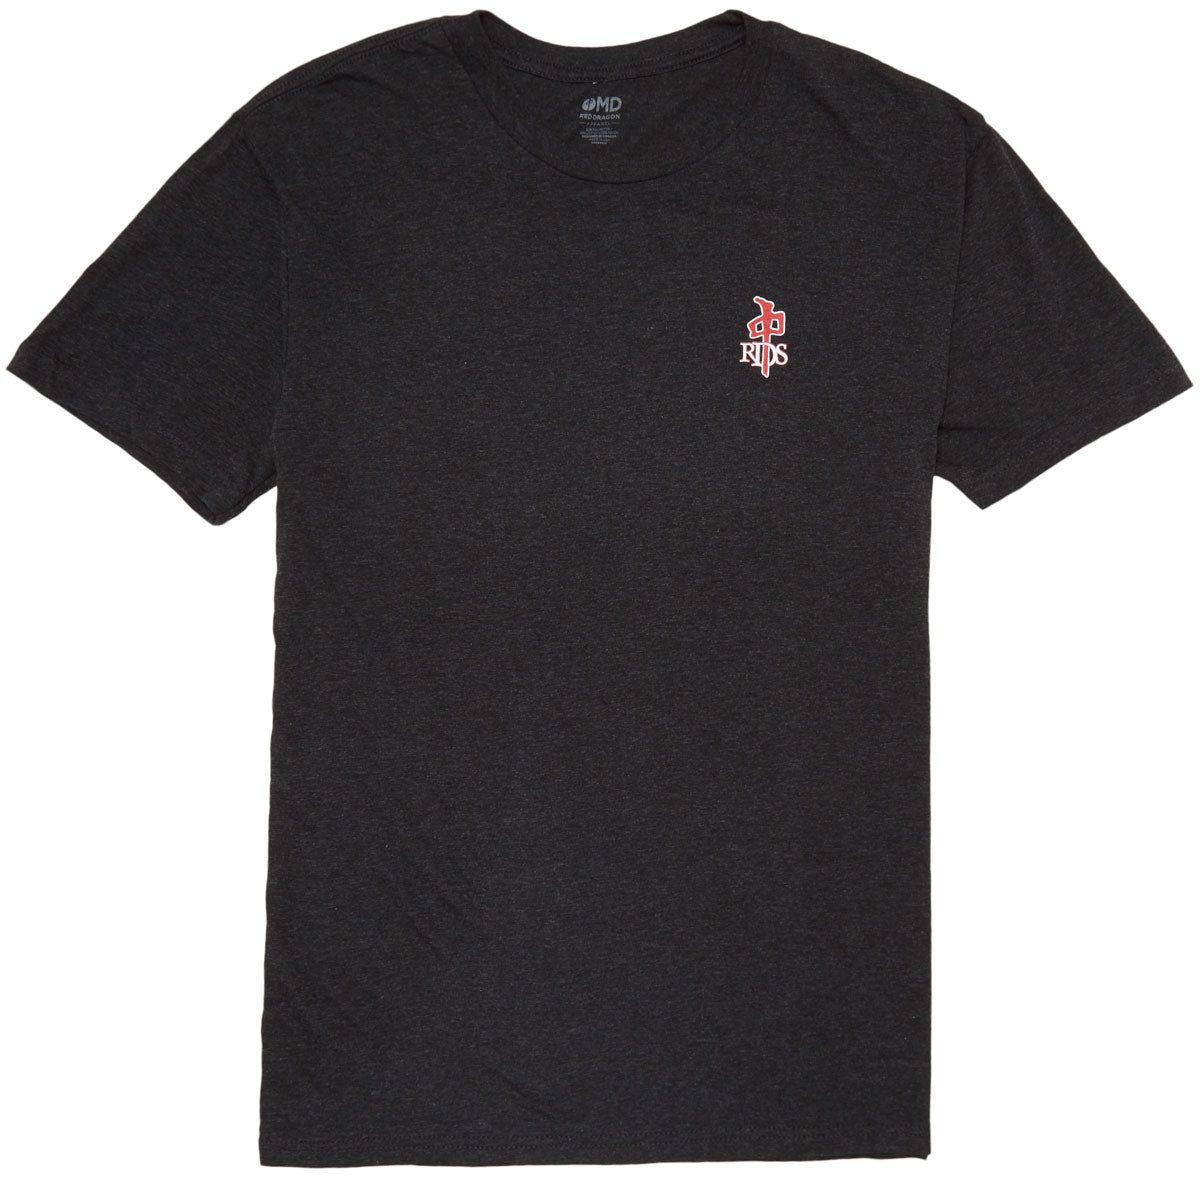 RDS Triblend Mini Og T-Shirt - Charcoal/Red/White image 1